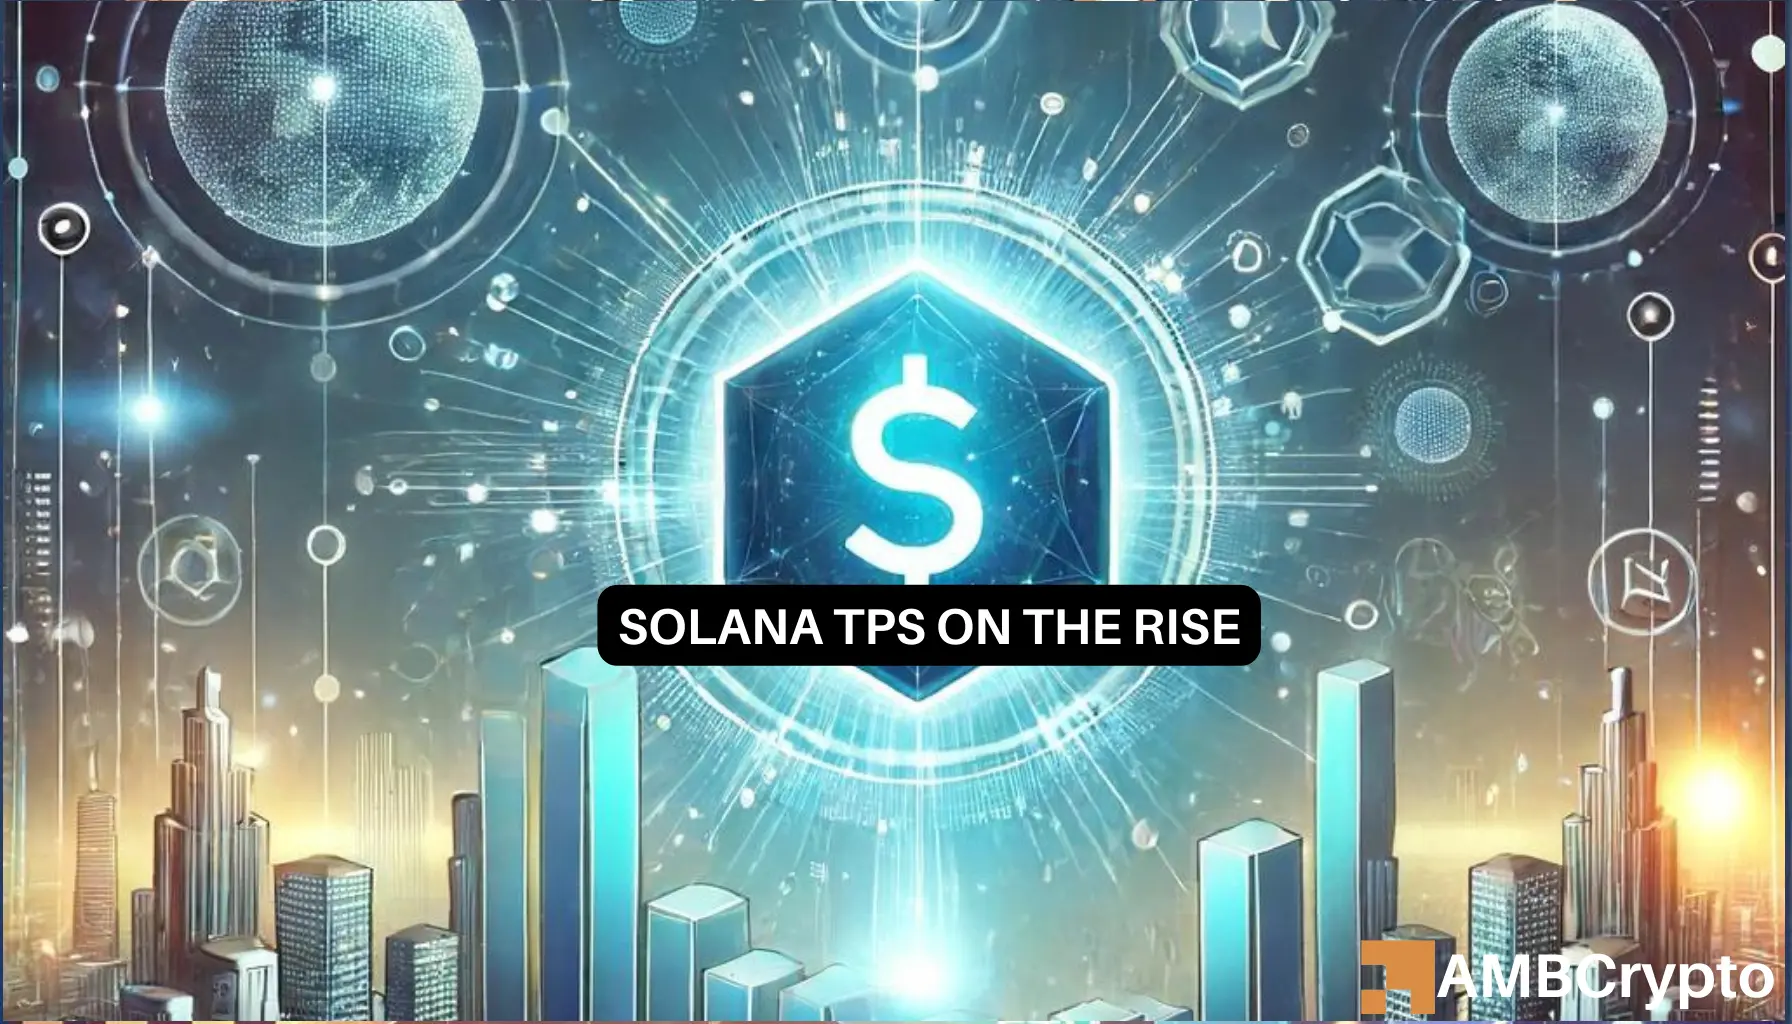 Solana TPS hits 2000 as network activity rises: Will price follow?